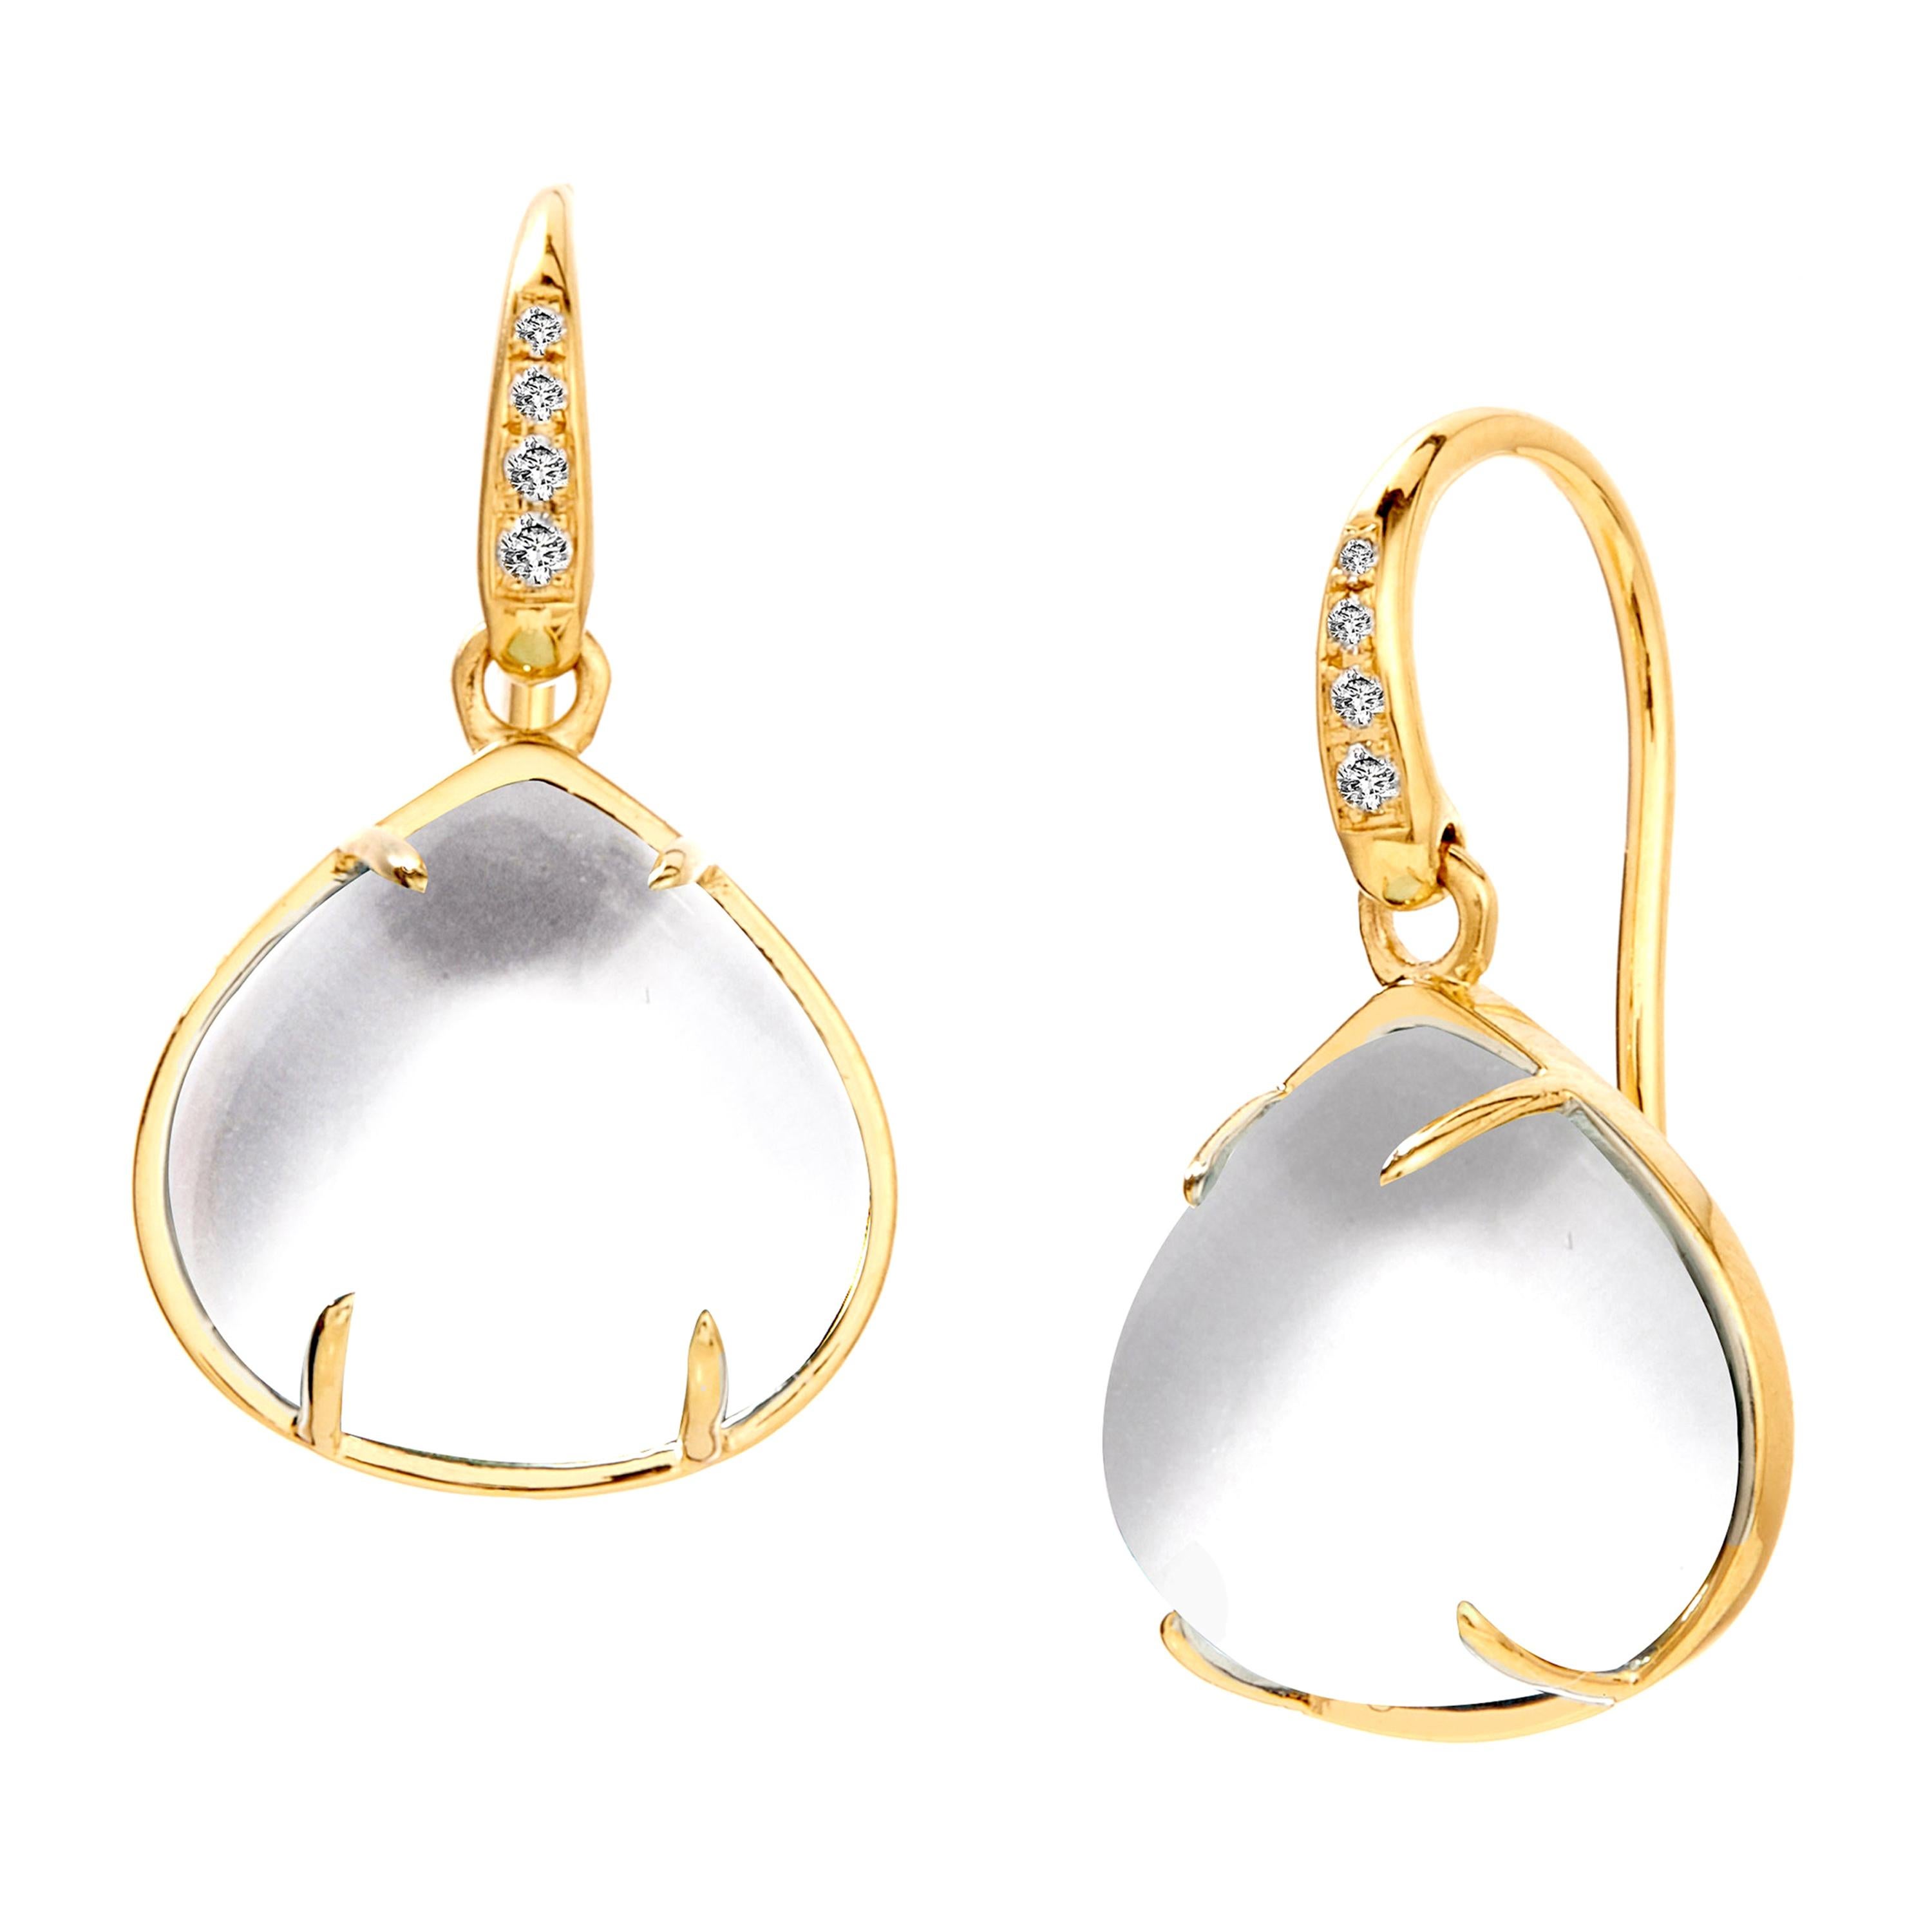 Syna Rock Crystal Yellow Gold Earrings with Diamonds